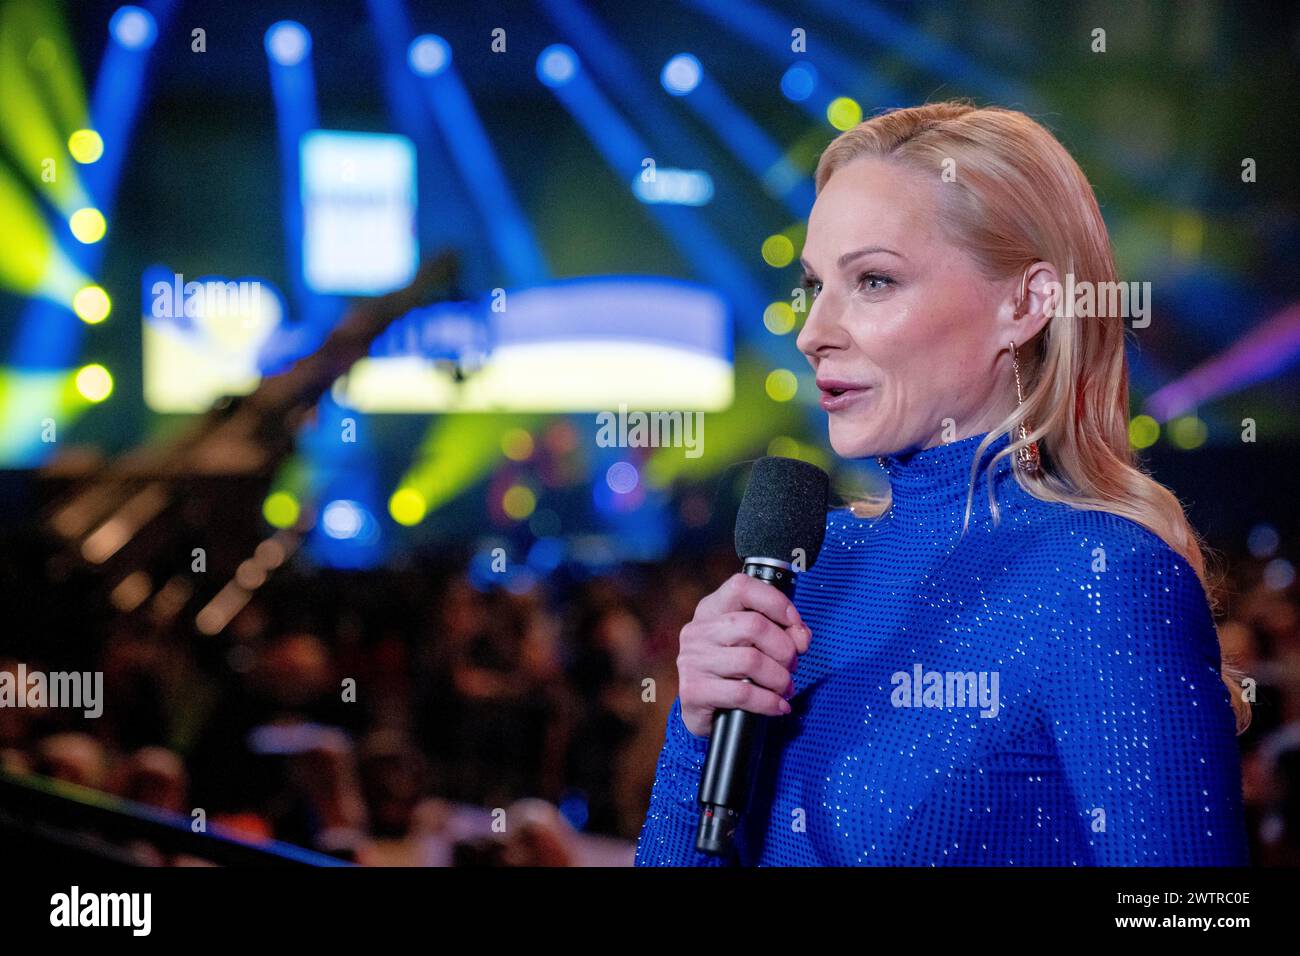 DARYNA TREGUBOVA moderating the solidarity concert 'United for Ukraine' in the Wiener Stadthalle in Vienna. Organised by 'All for Ukraine - Hilfe für Stock Photo